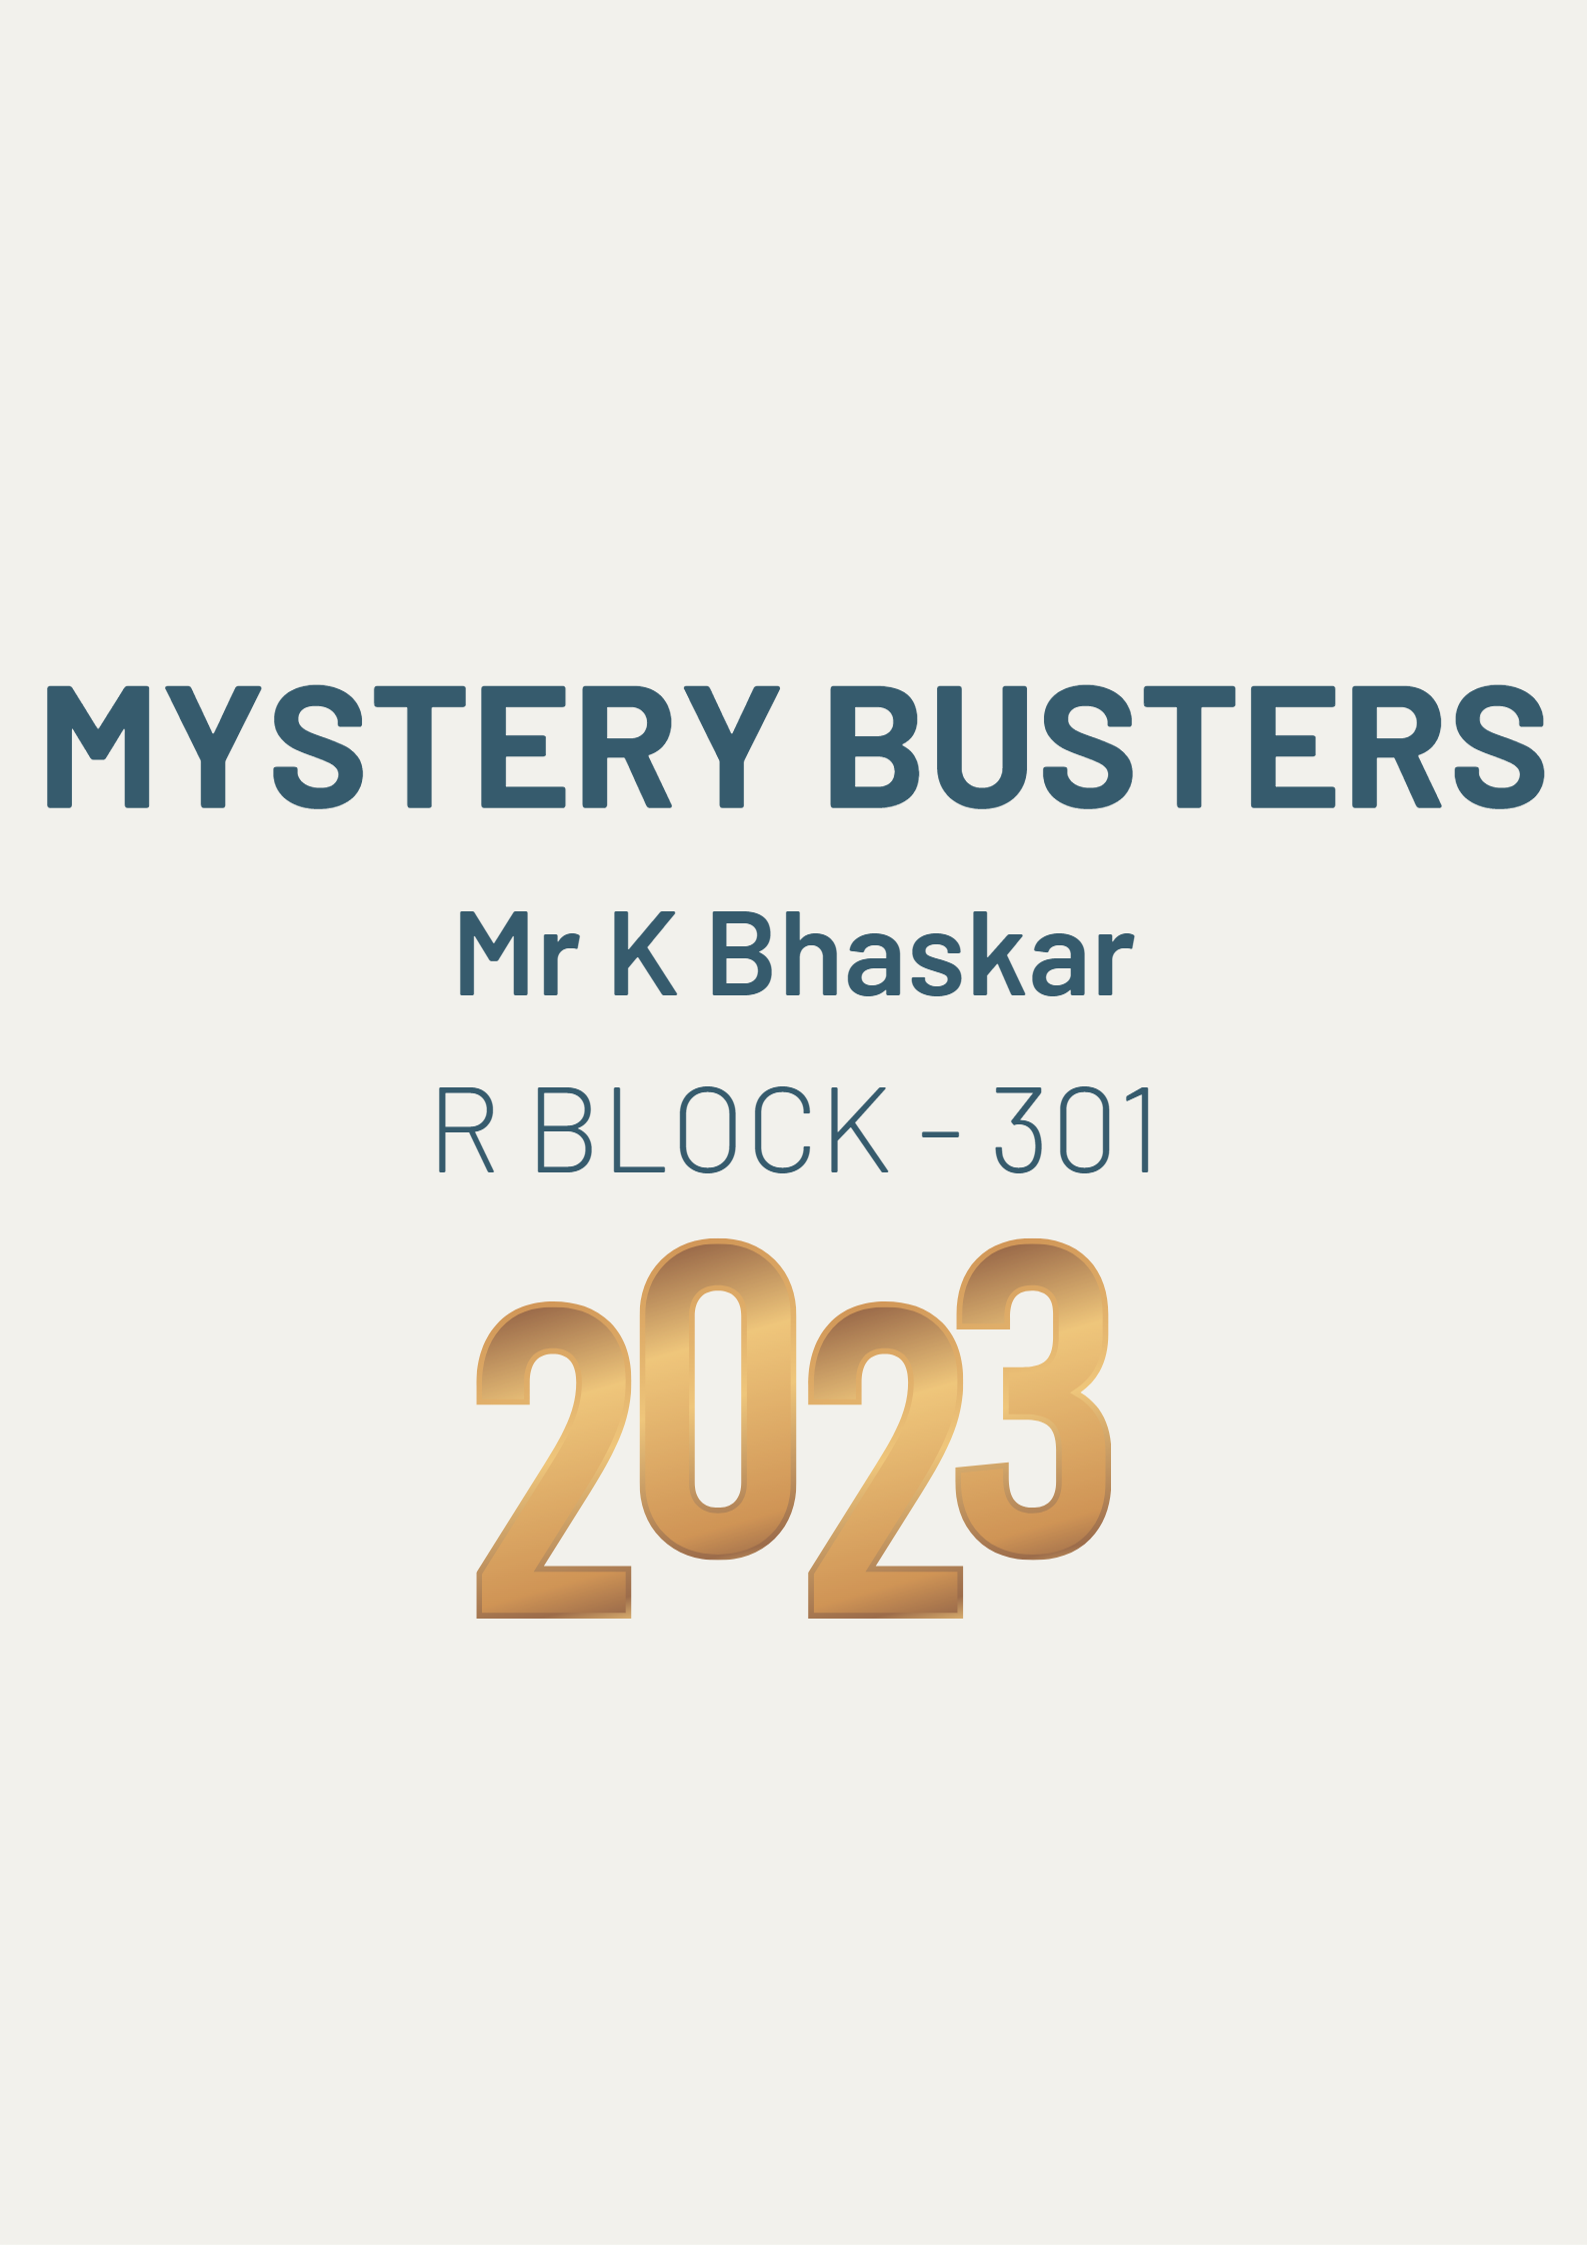 MysteryBusters